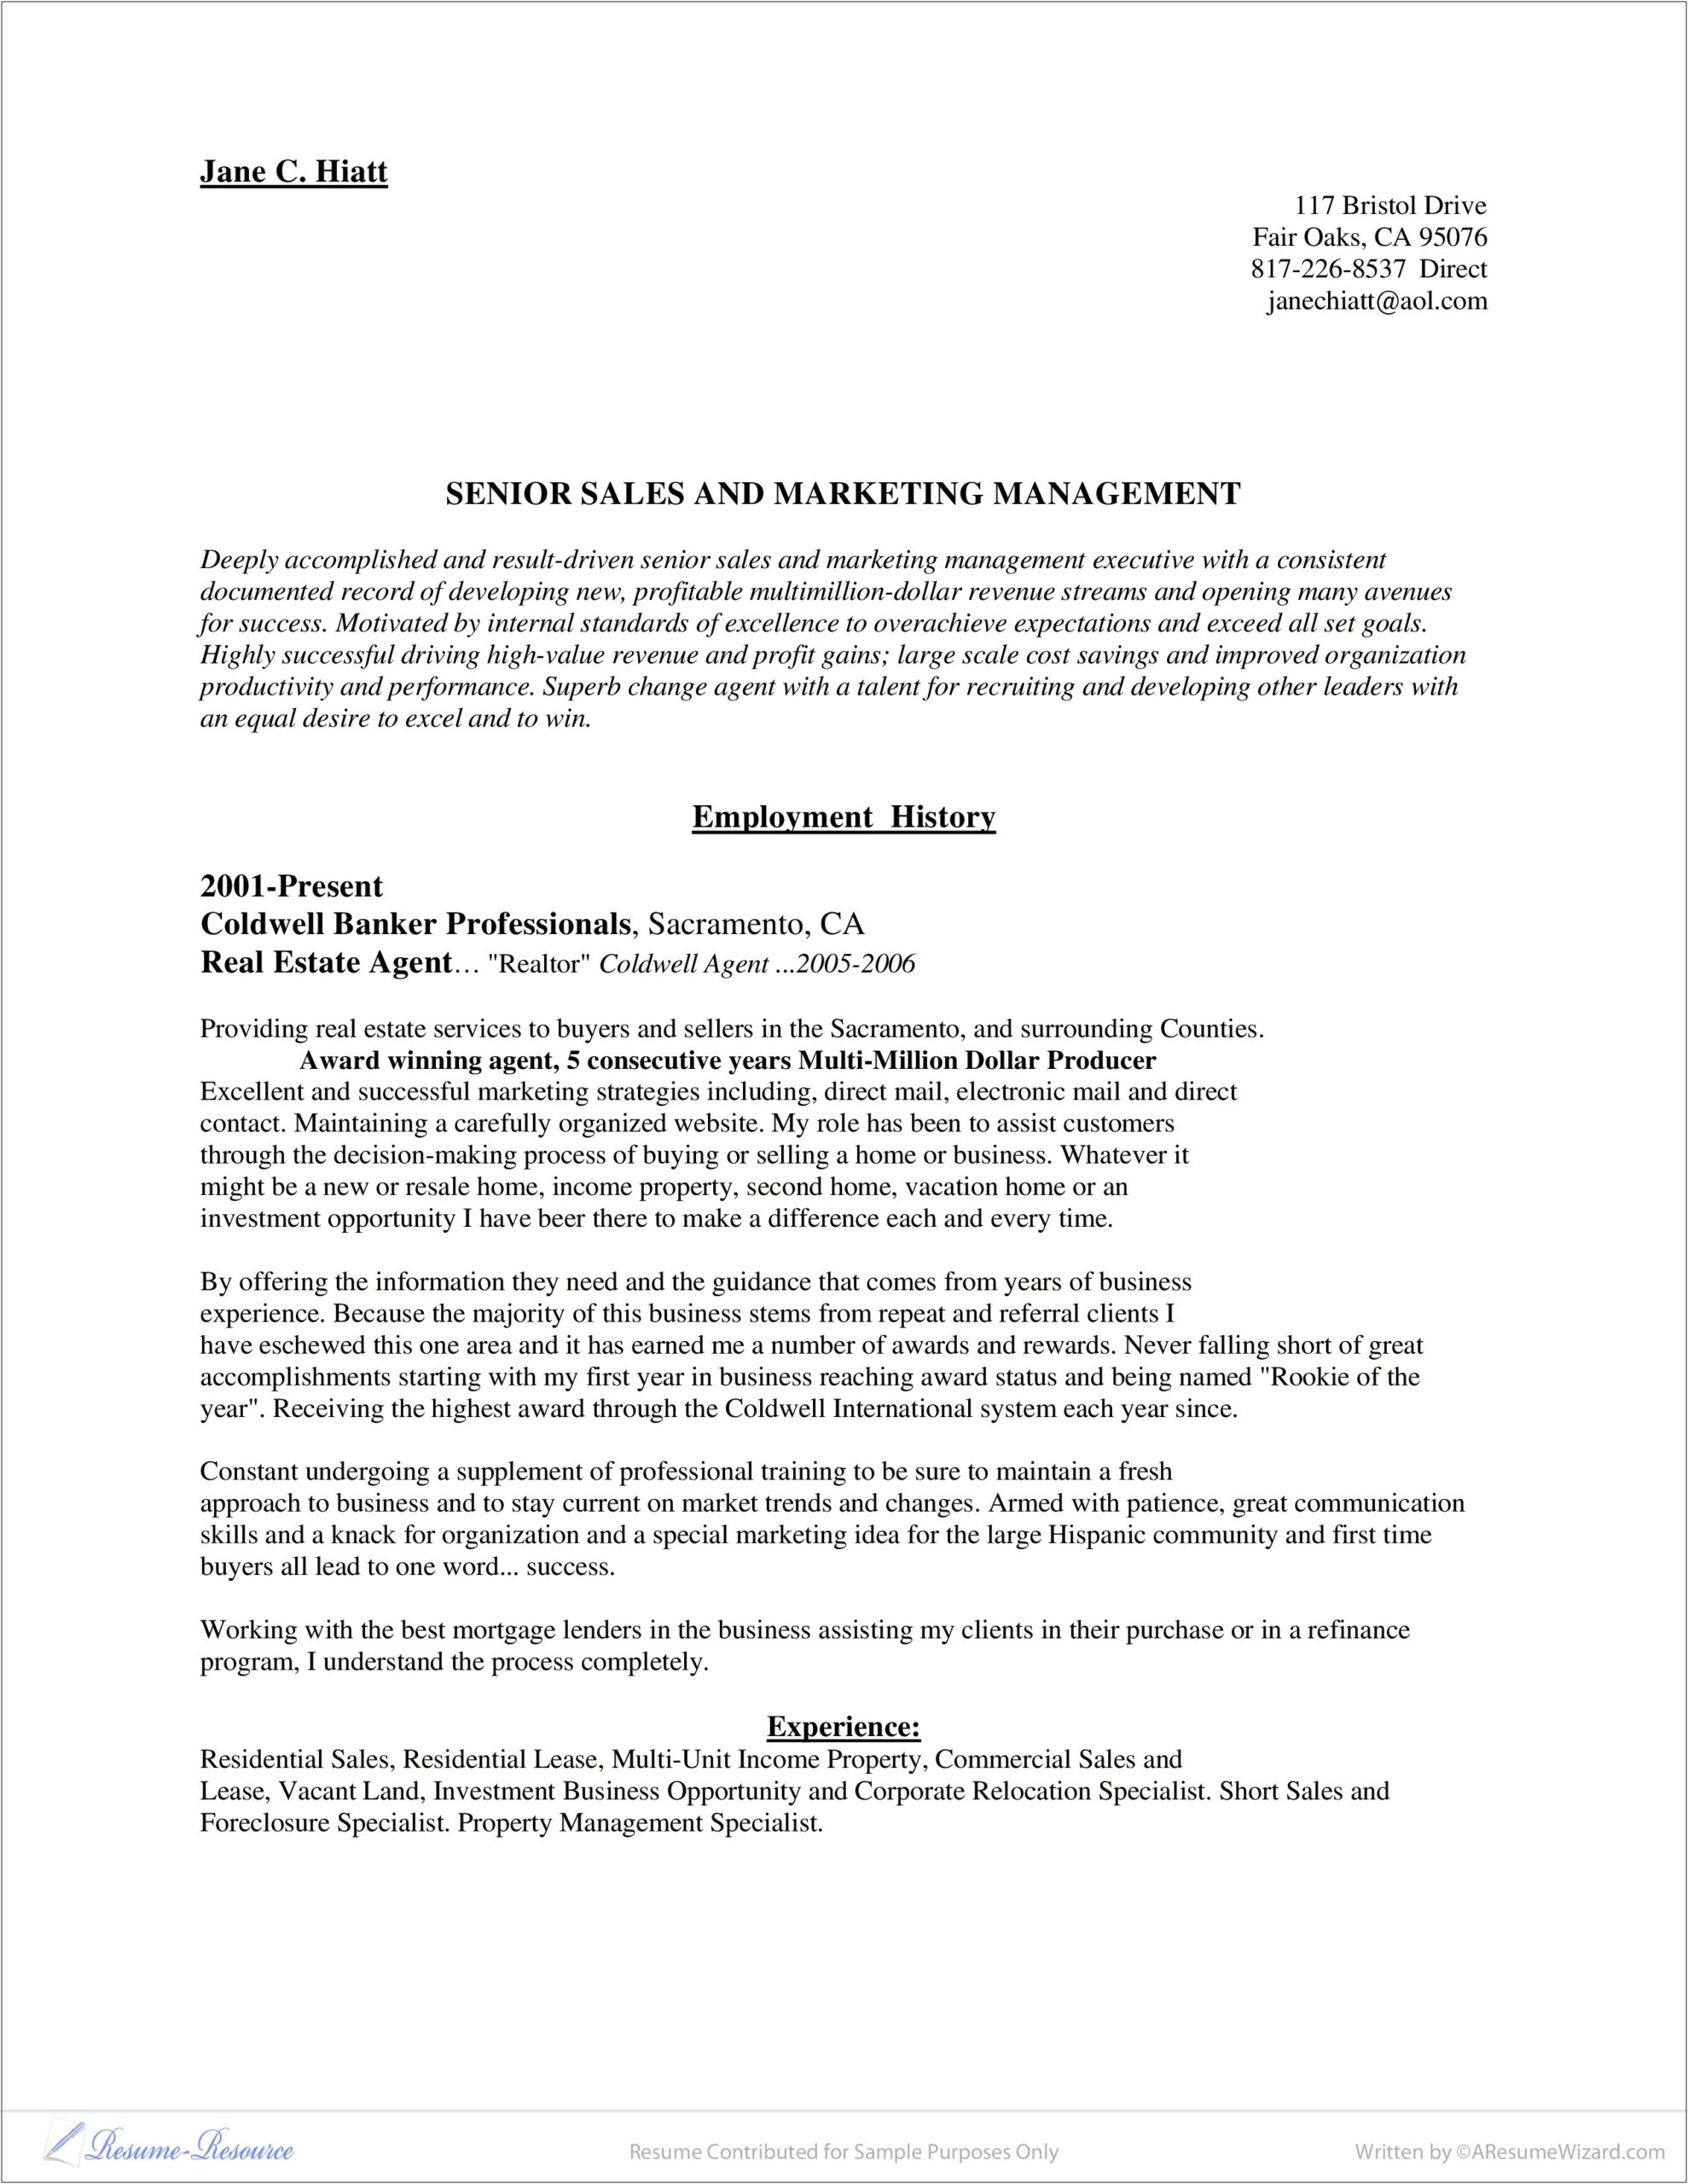 Industrial Property Management Specialist Resume